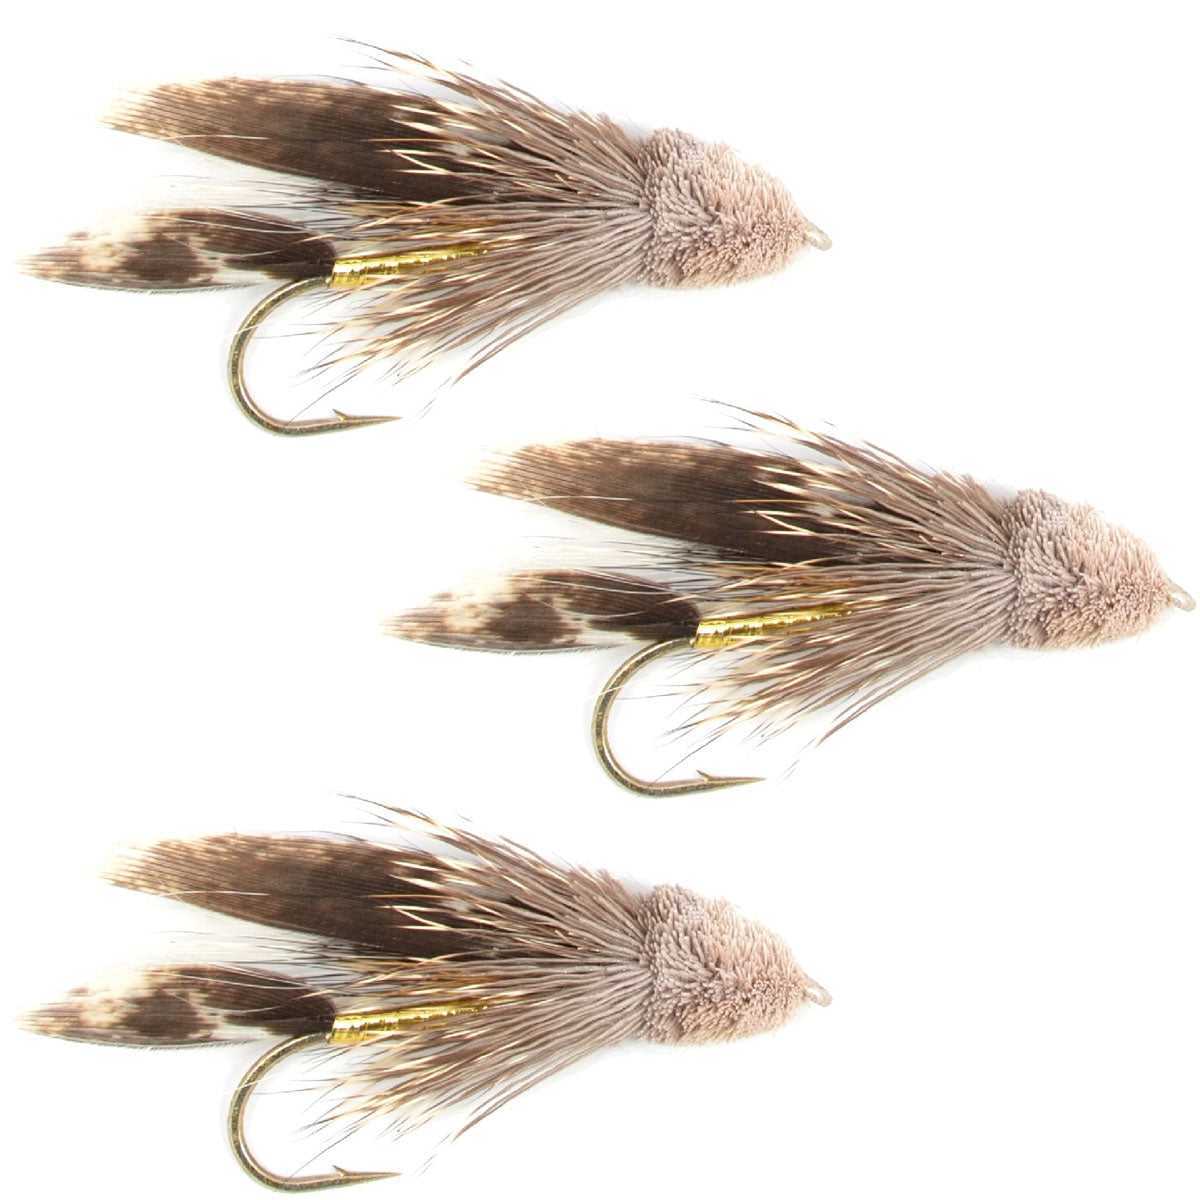 3 Pack Muddler Minnow Trout and Bass Streamer Fly - Hook Size 6